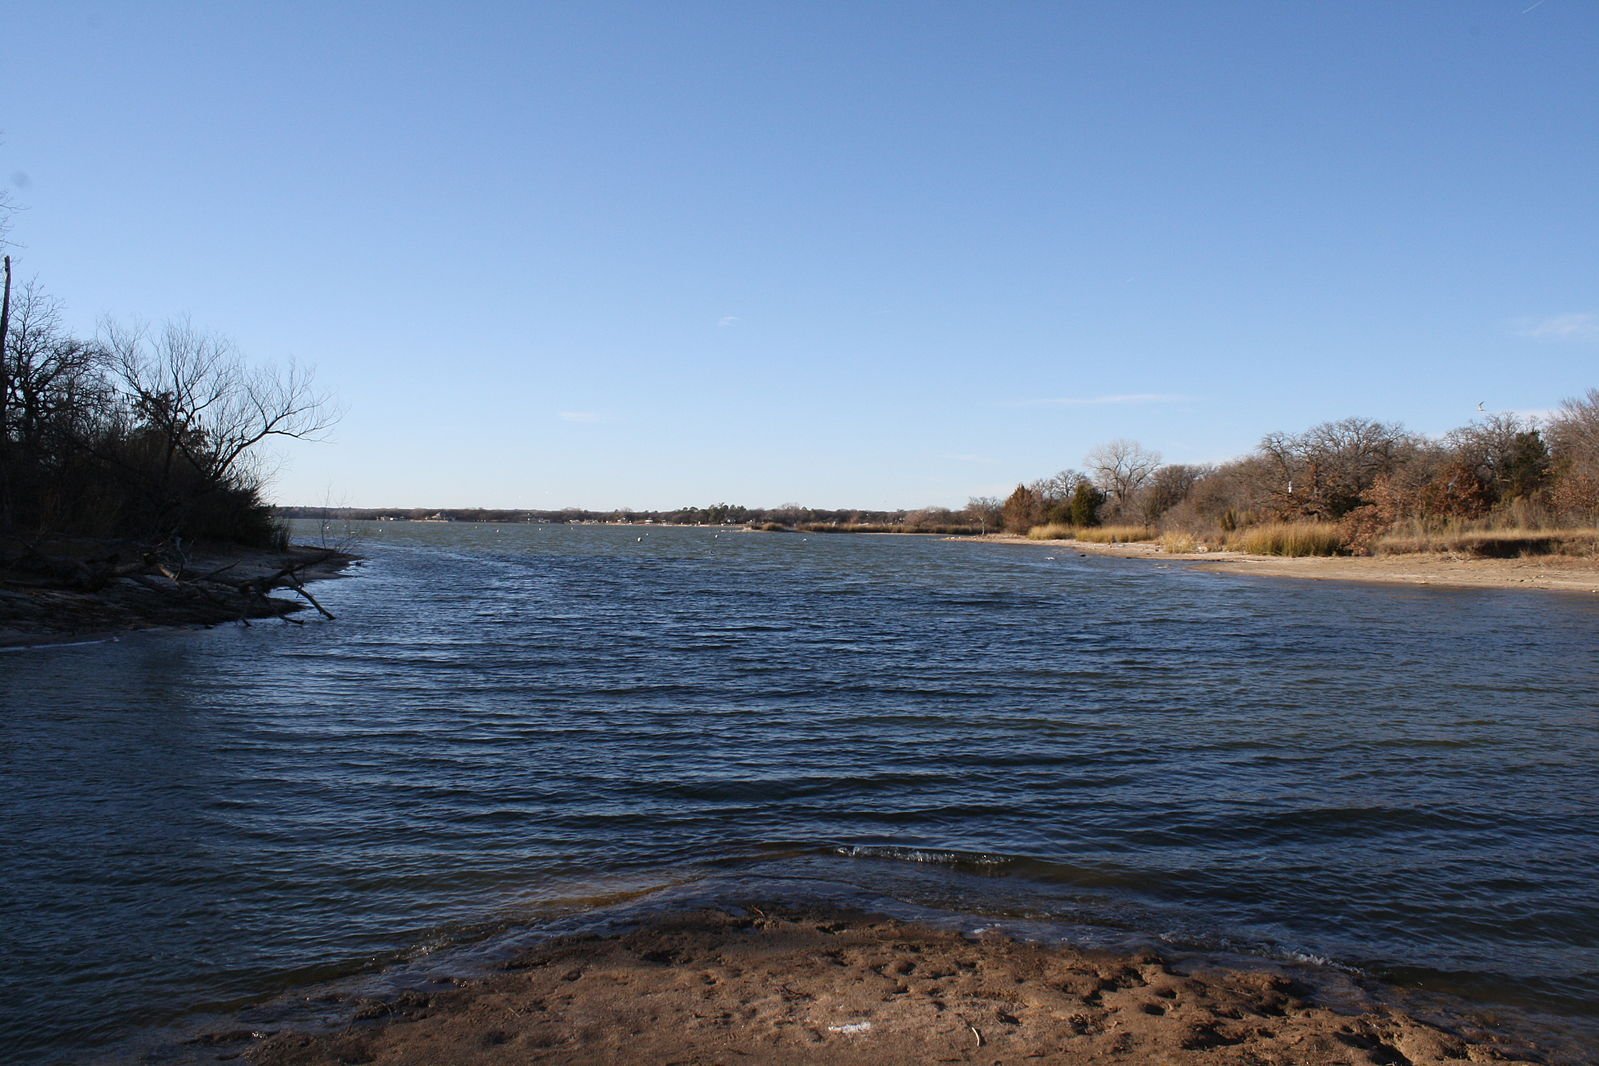 A view of the lake from Tarrant County